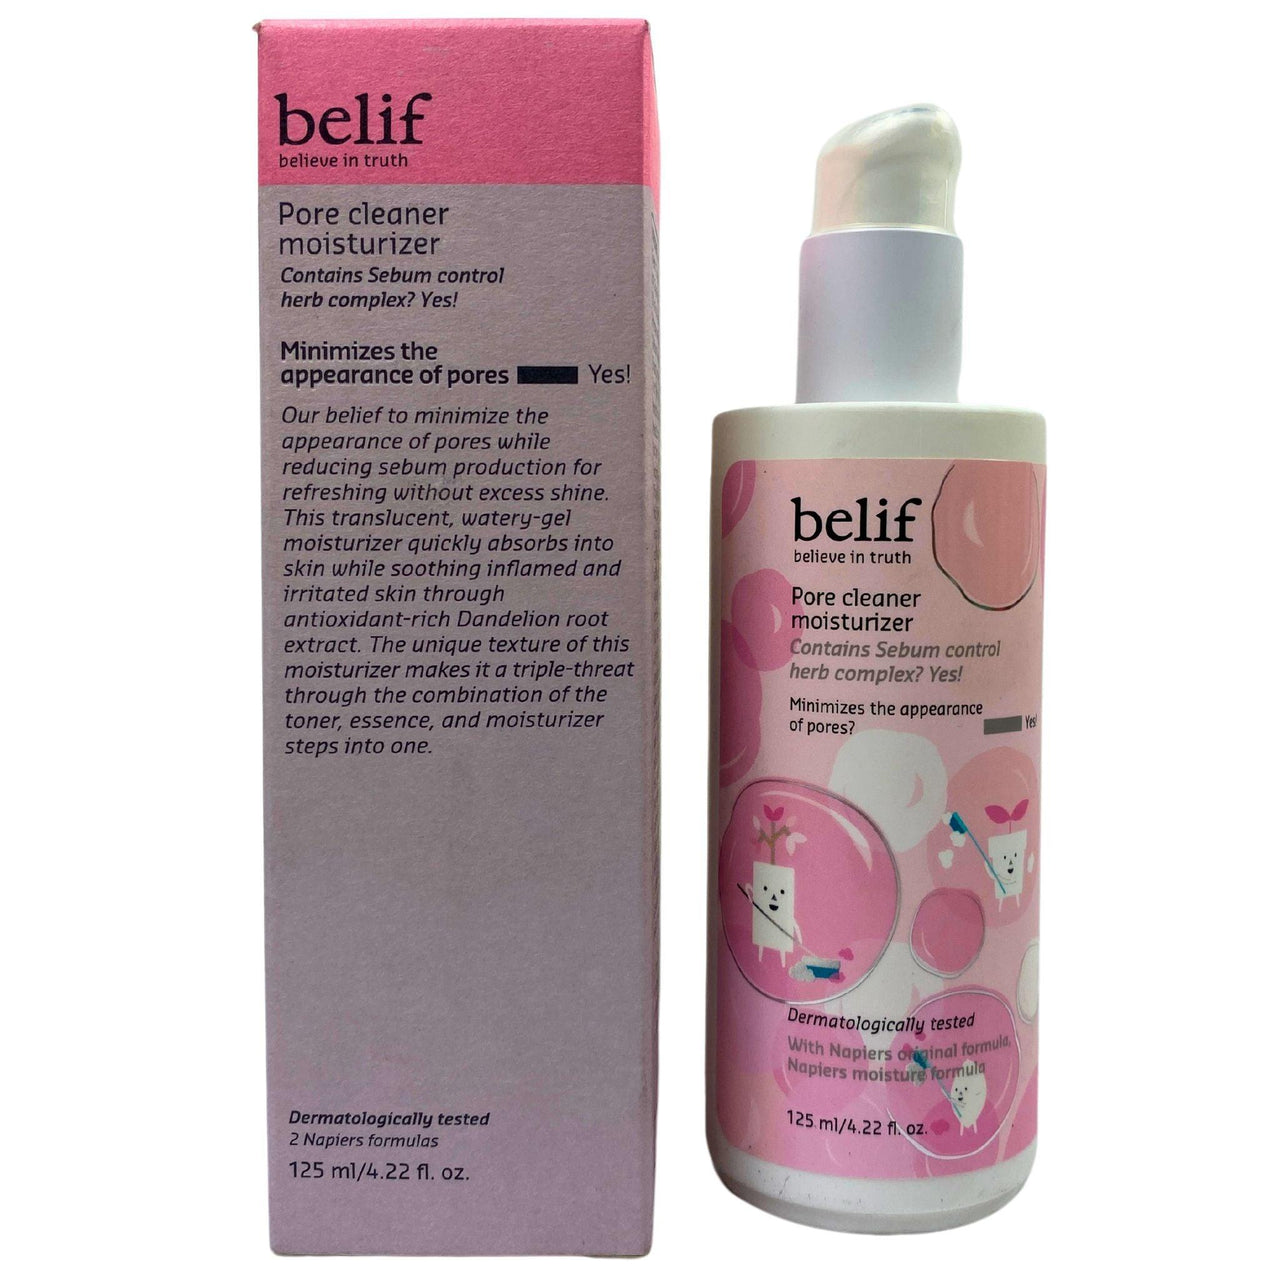 Belif Believe In Truth Pore Cleaner Moisturizer Dermatologically Tested 4.22oz (48 Pcs Lot) - Discount Wholesalers Inc